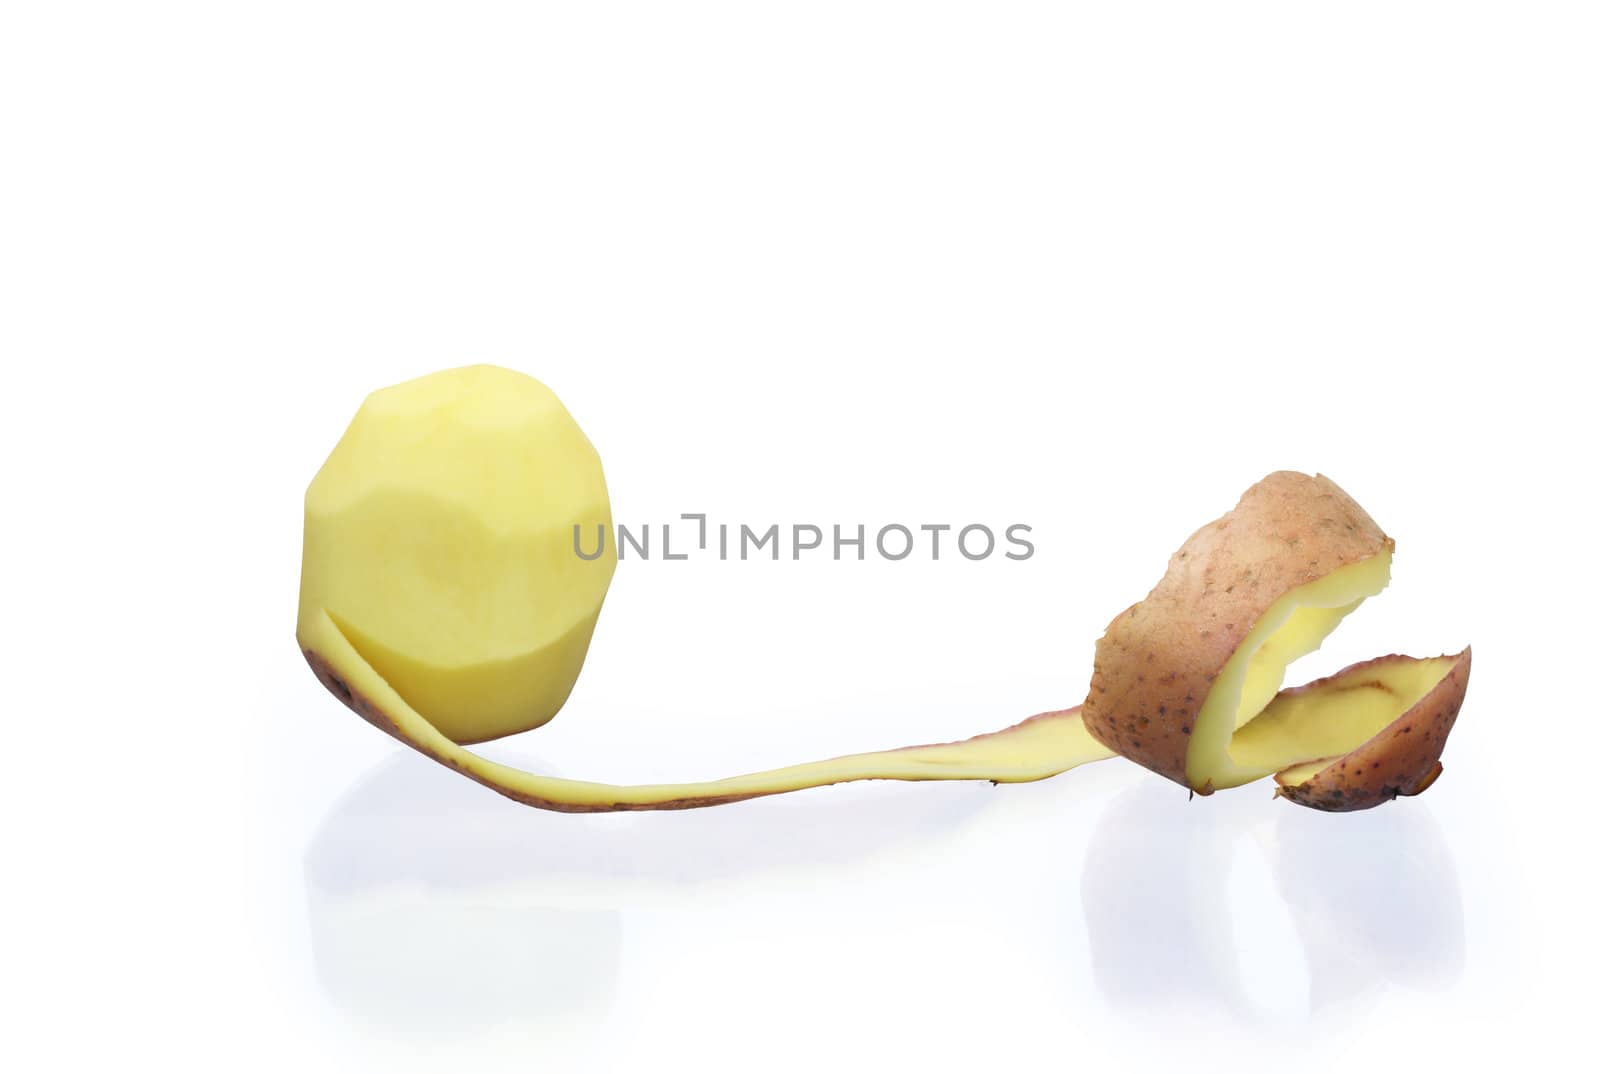 Potato peeled isolated on white background with clipping path